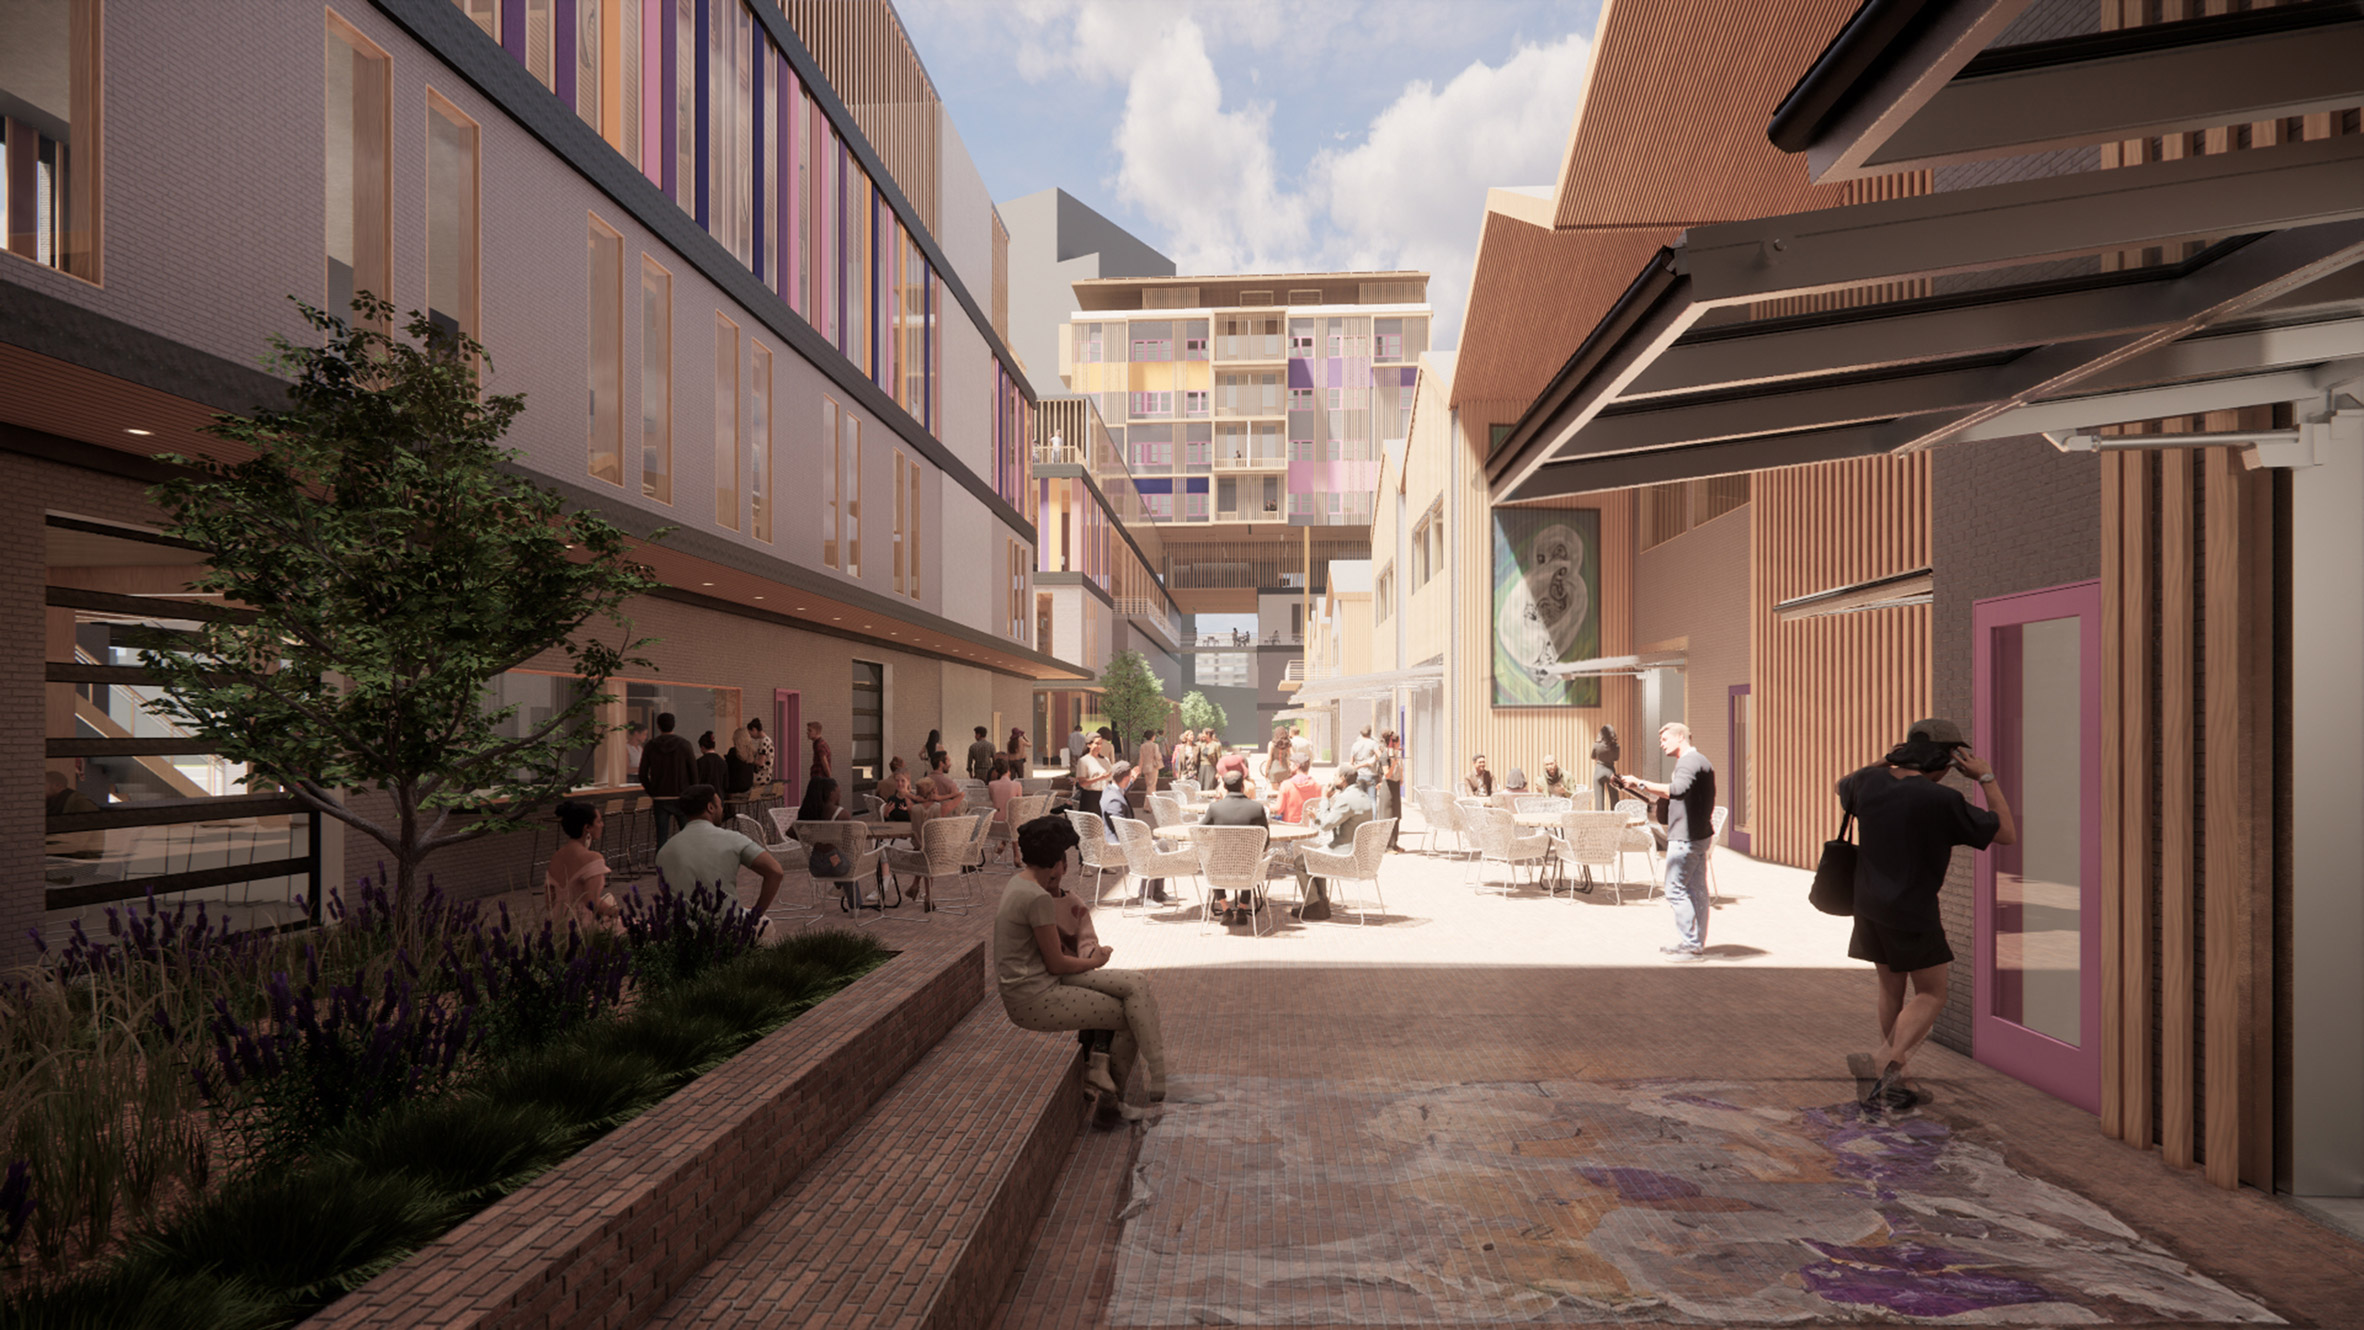 Visualisation showing mixed-use alleyway space